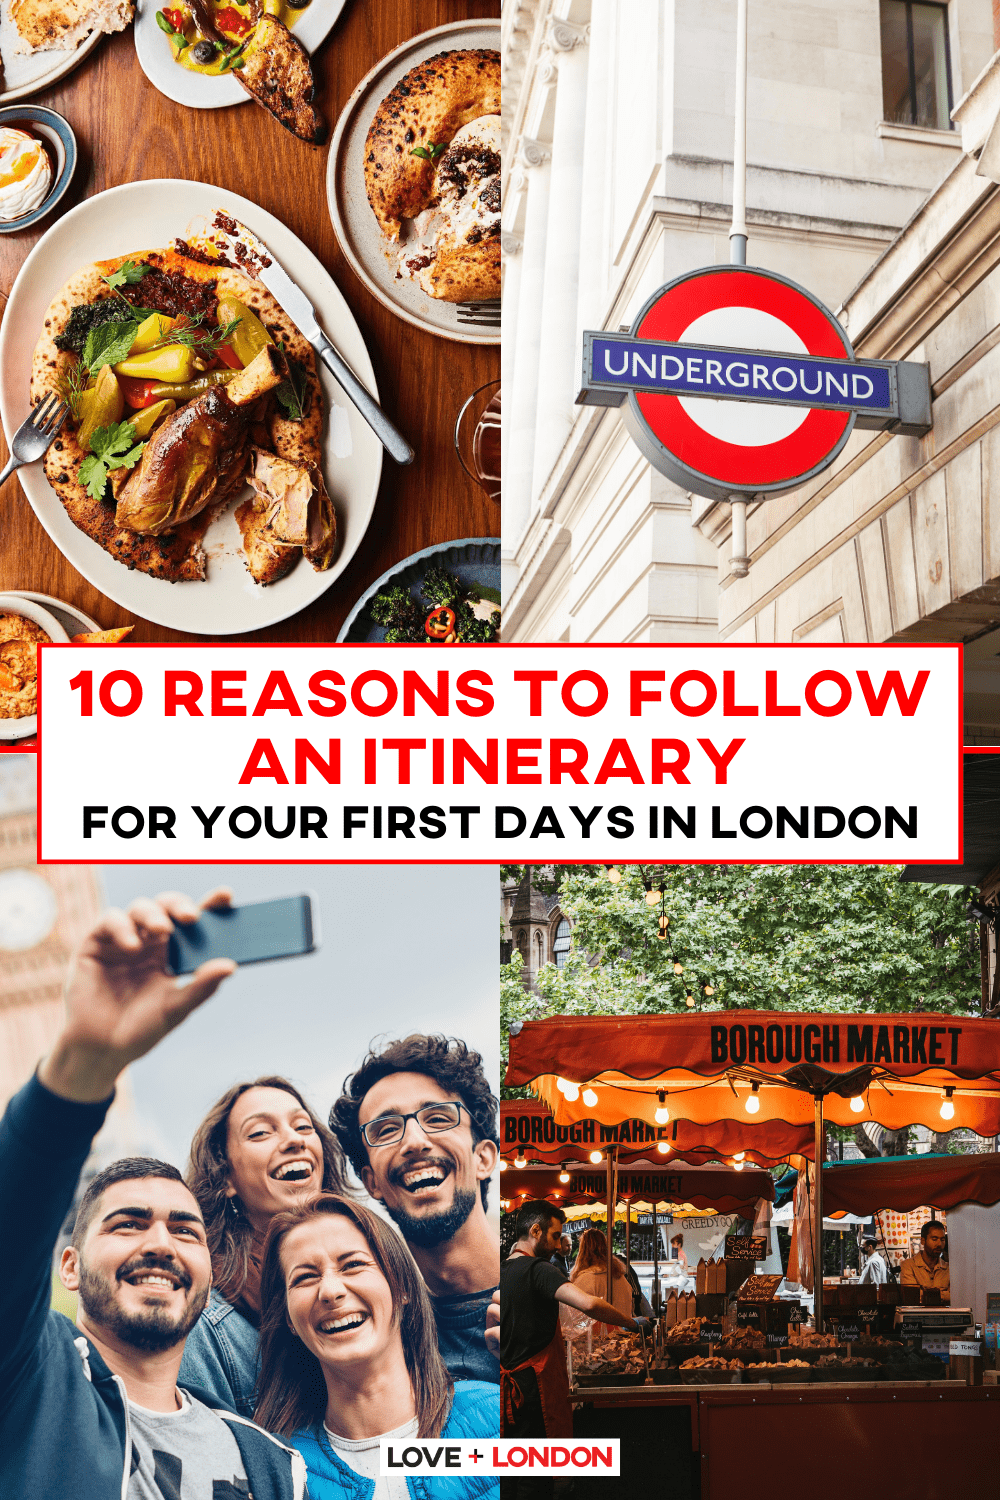 10 Reasons to Follow an Itinerary For Your First Days in London